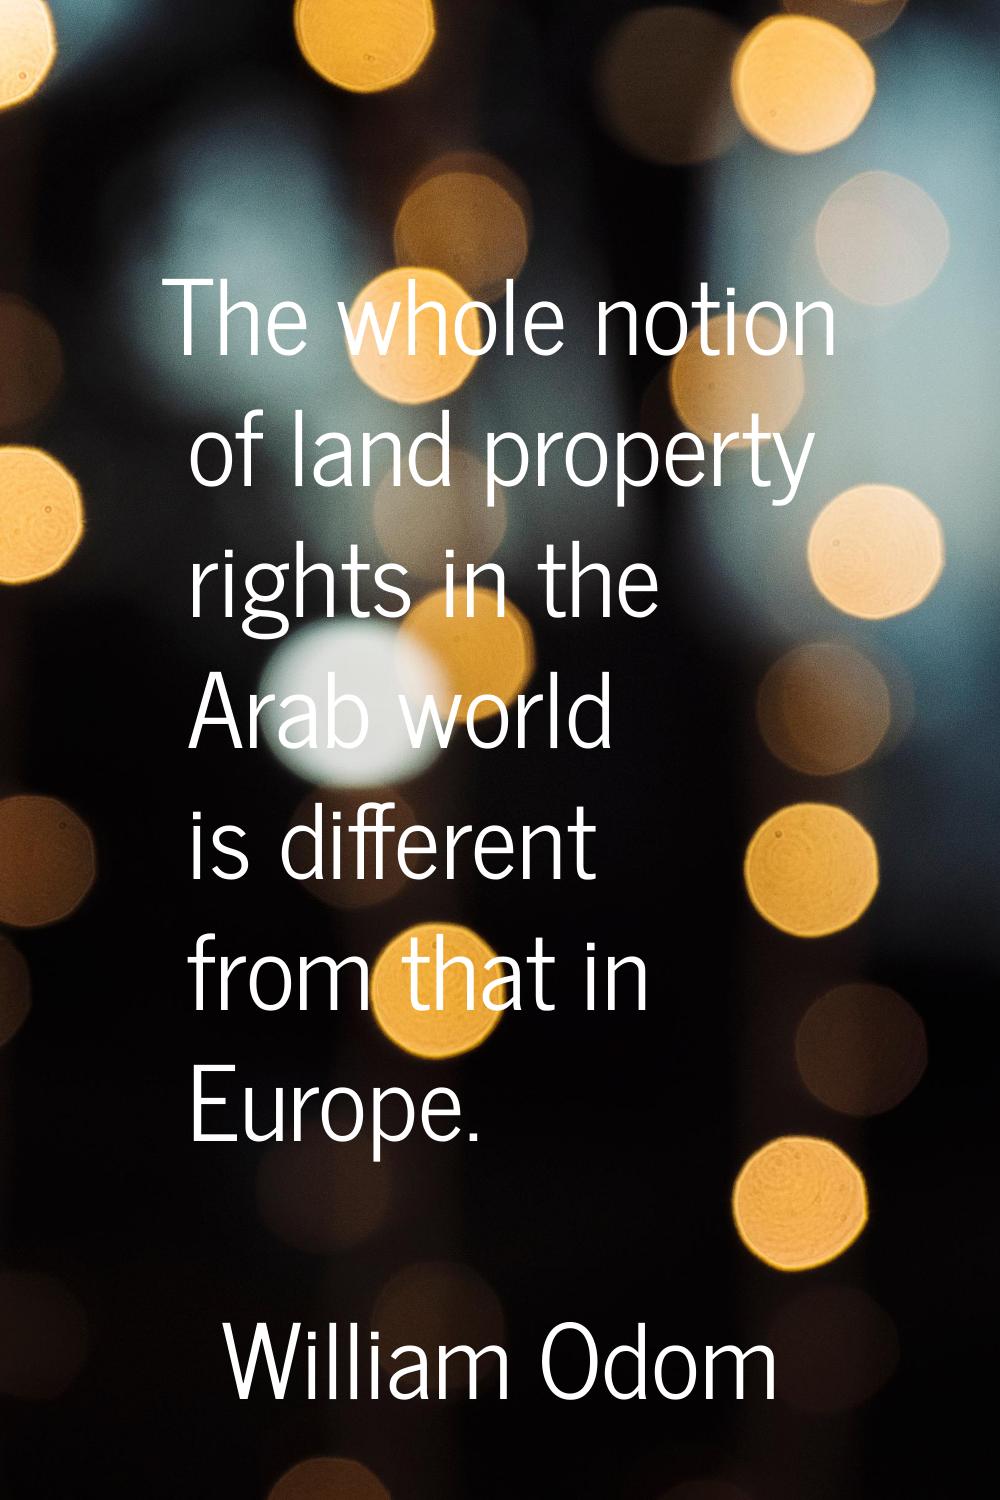 The whole notion of land property rights in the Arab world is different from that in Europe.